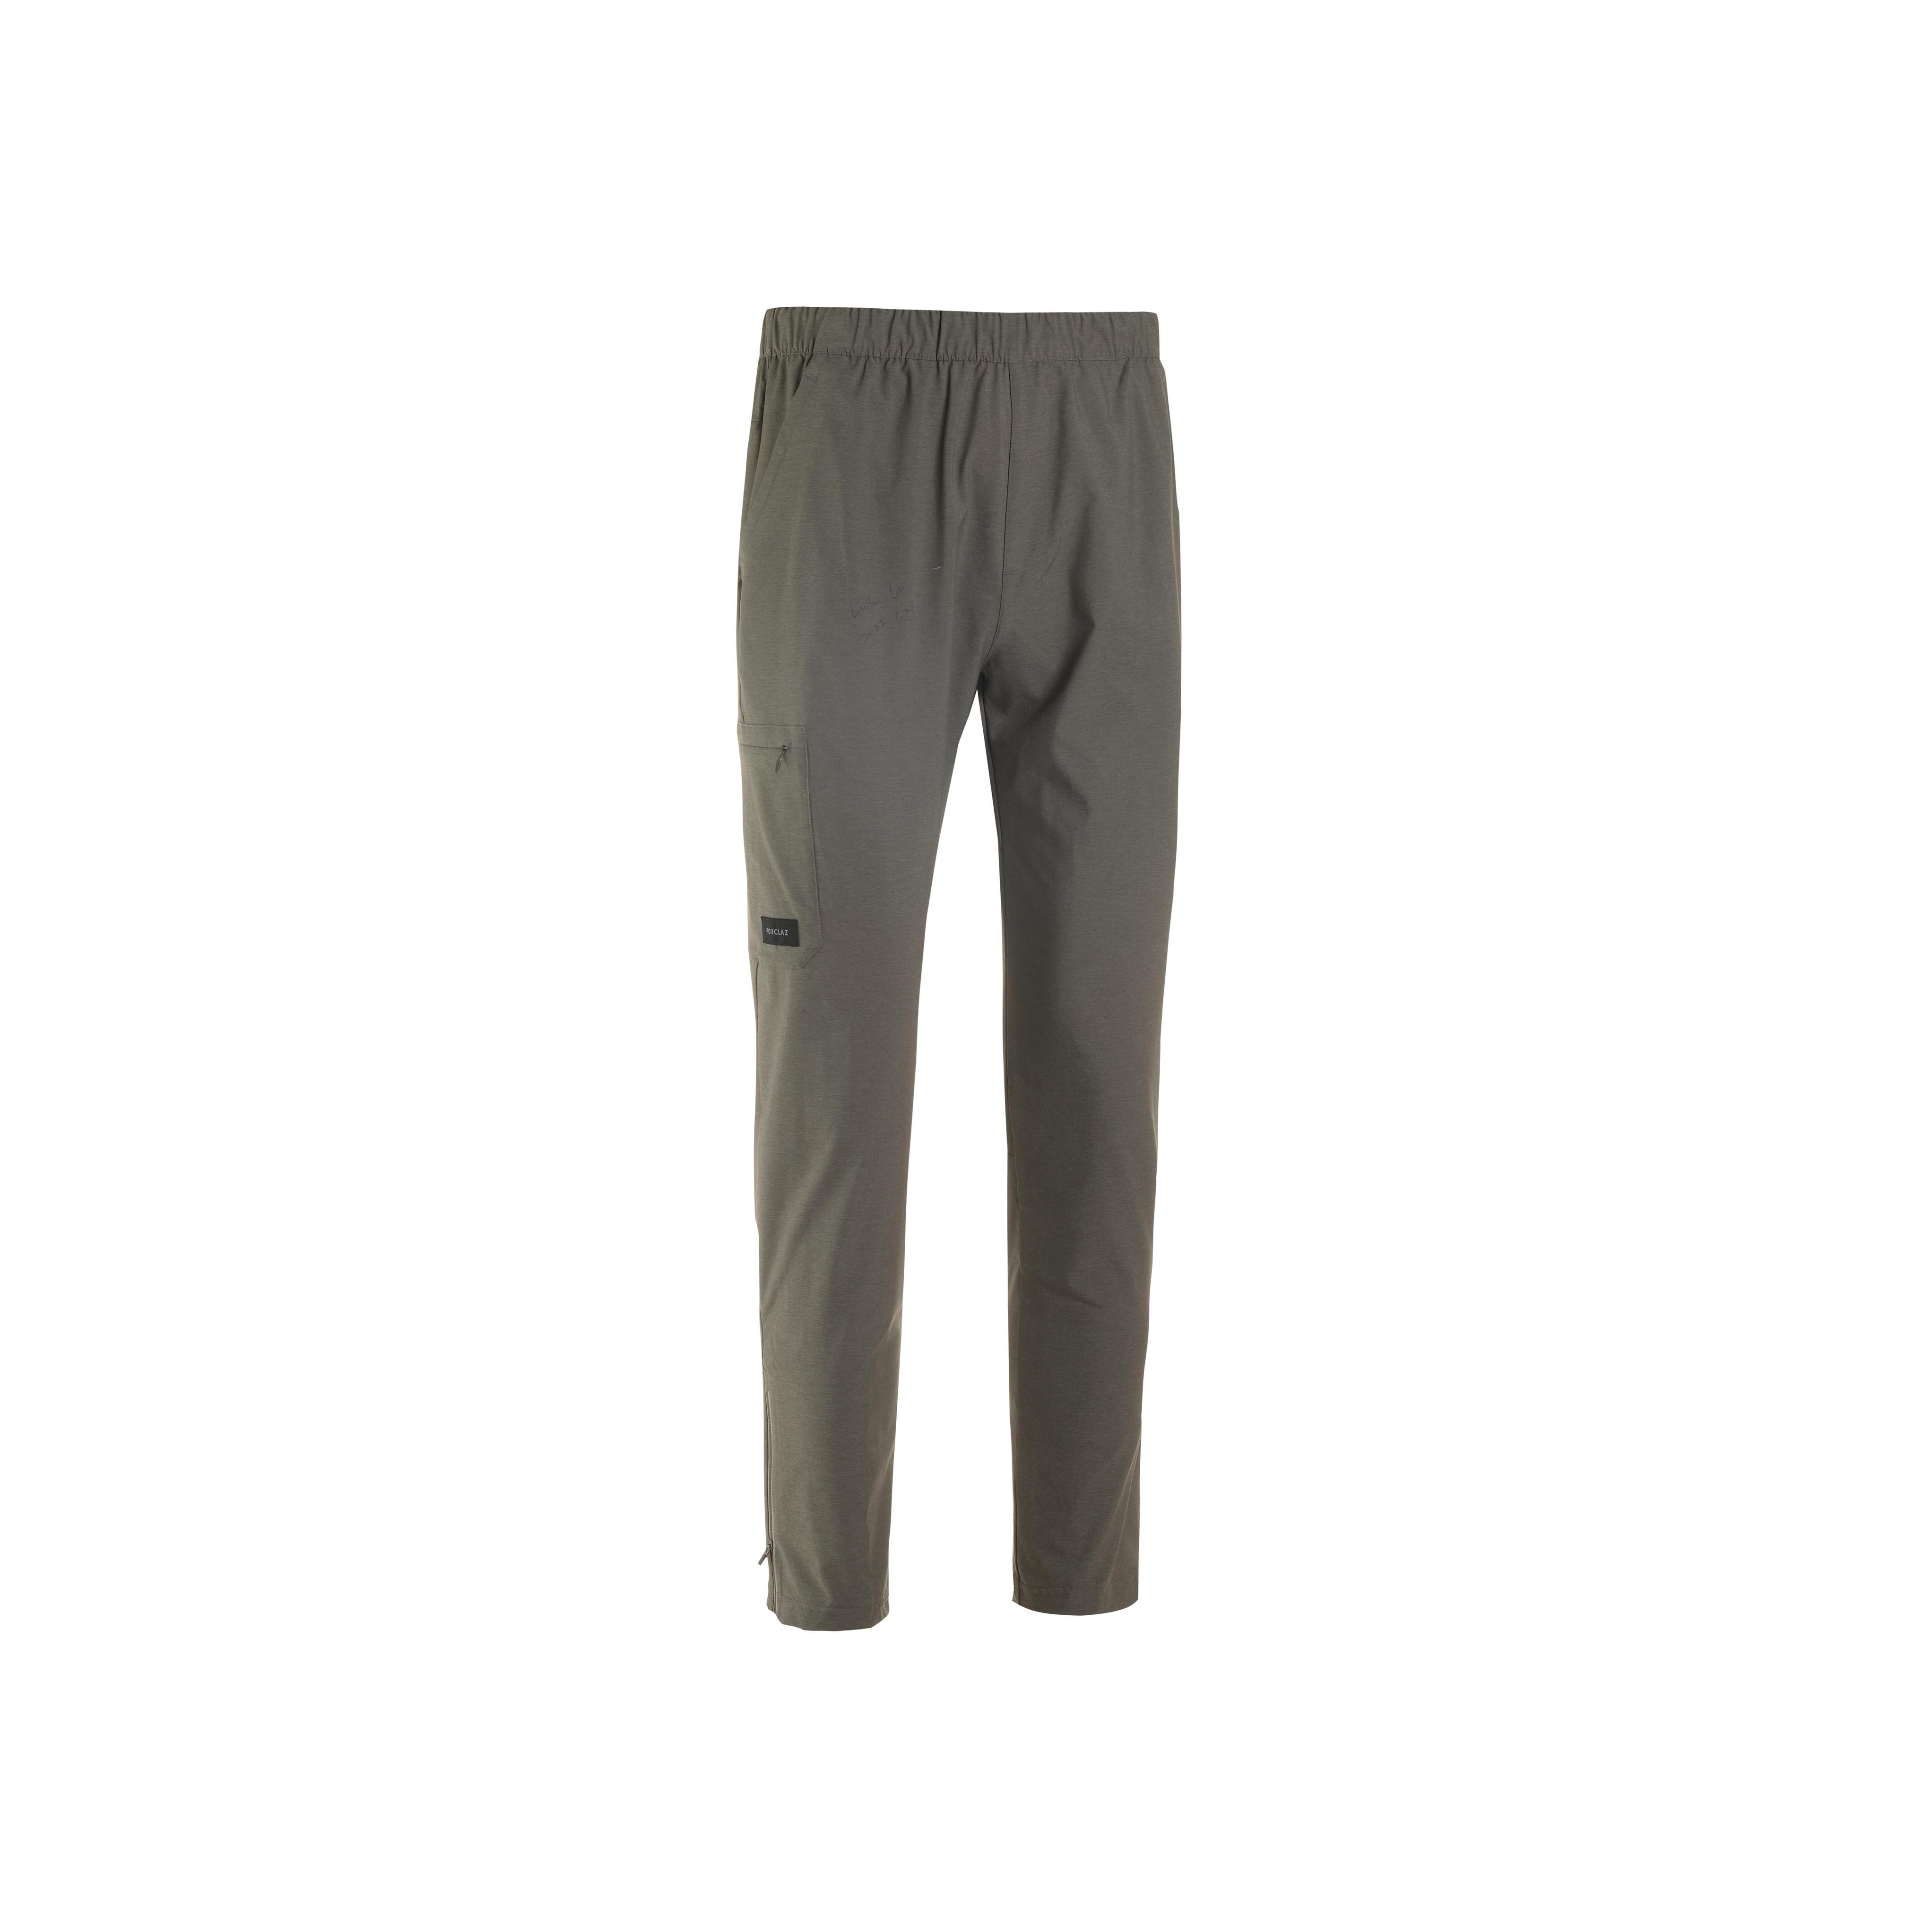 Men’s Hiking trousers - TRAVEL 900 offers at S$ 49.9 in Decathlon